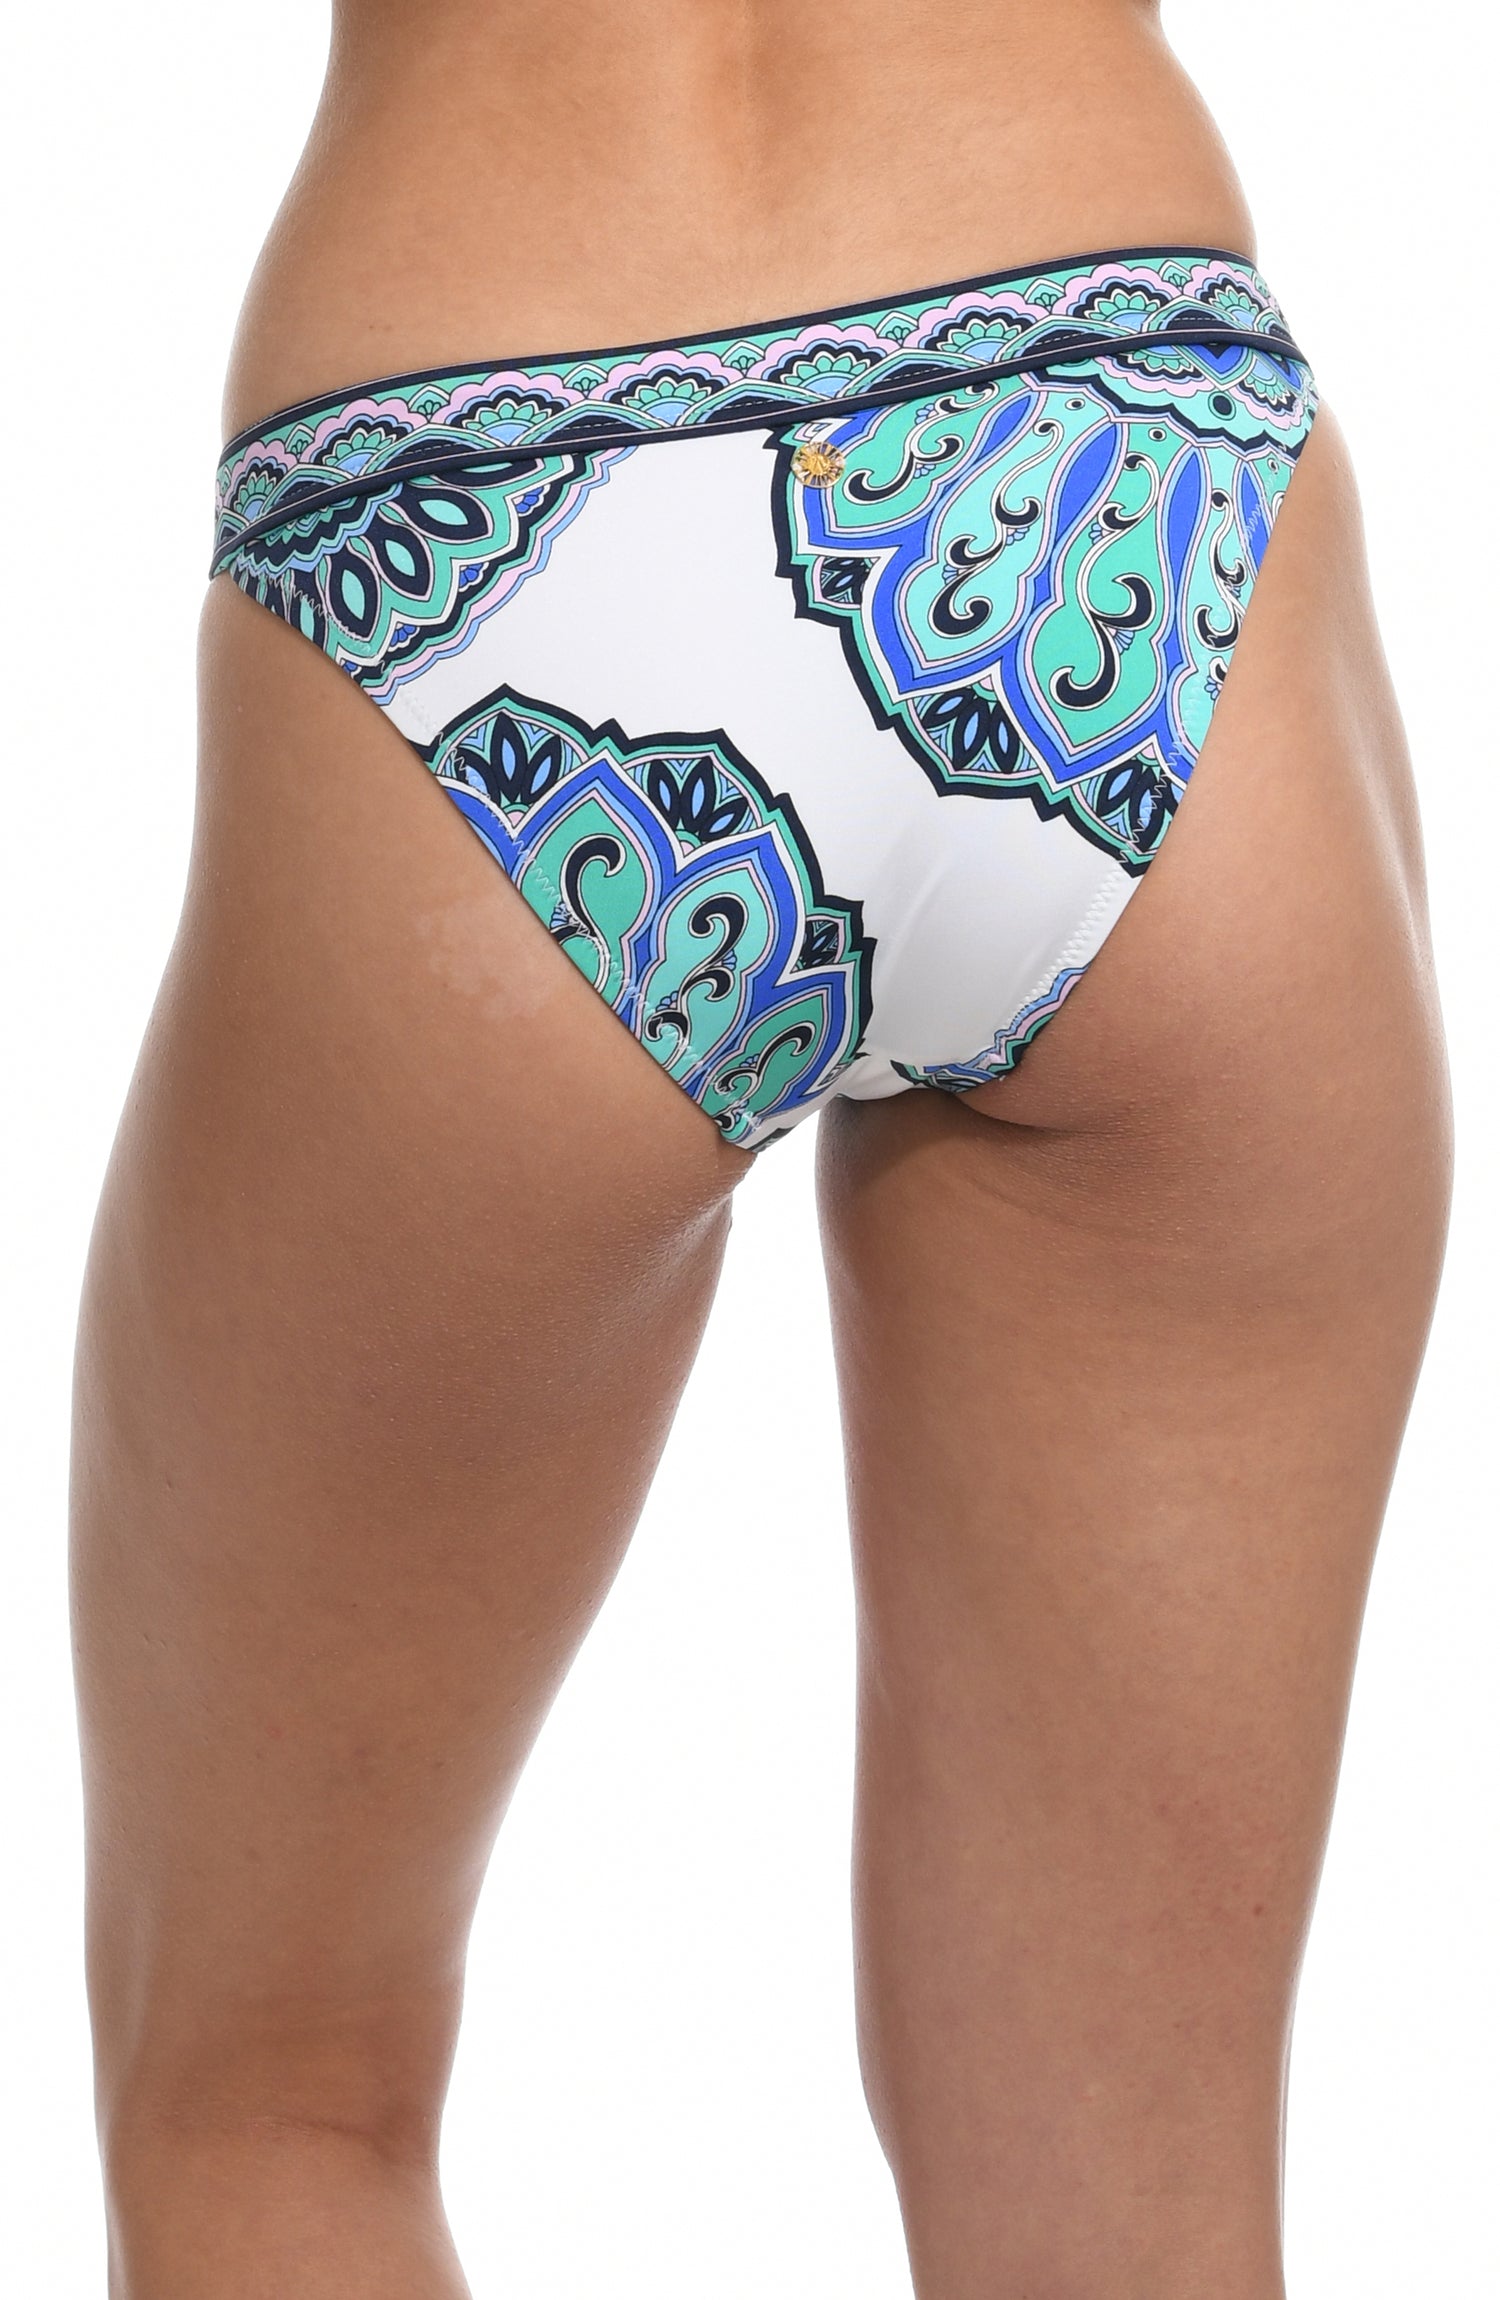 Model is wearing a white french cut swimsuit bottom with shades of a blue medallion all over print from our Mellow Medallion collection.